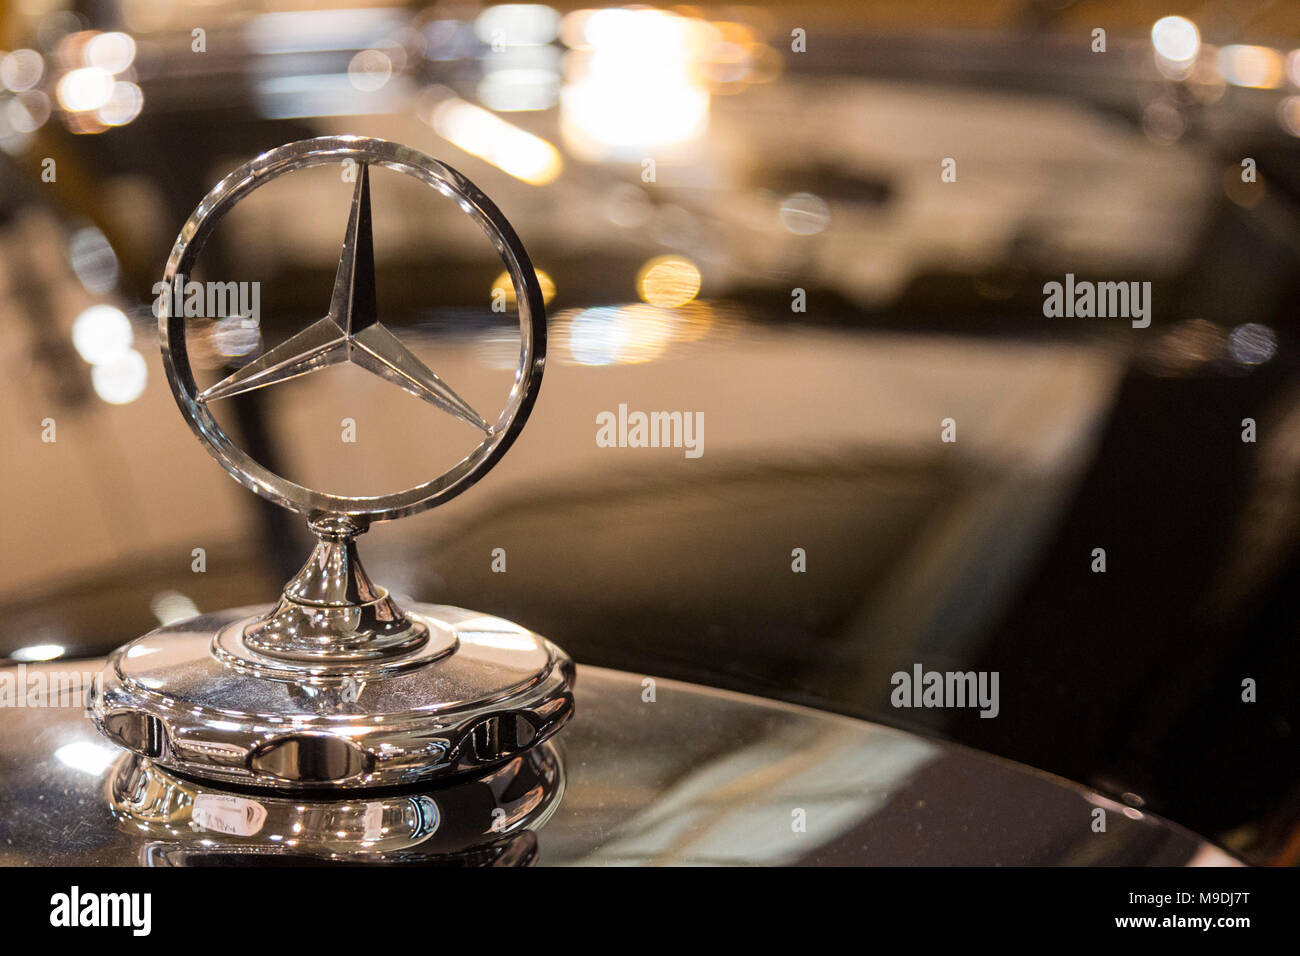 Mercedes-Benz star, hood ornament. Techno-Classica Essen is the world leading automobile show for classic and vintage cars and collectible automobiles. In 2018, the motor show attracted over 185,000 visitors. More than 1,250 exhibitors from over 30 countries take part. Stock Photo